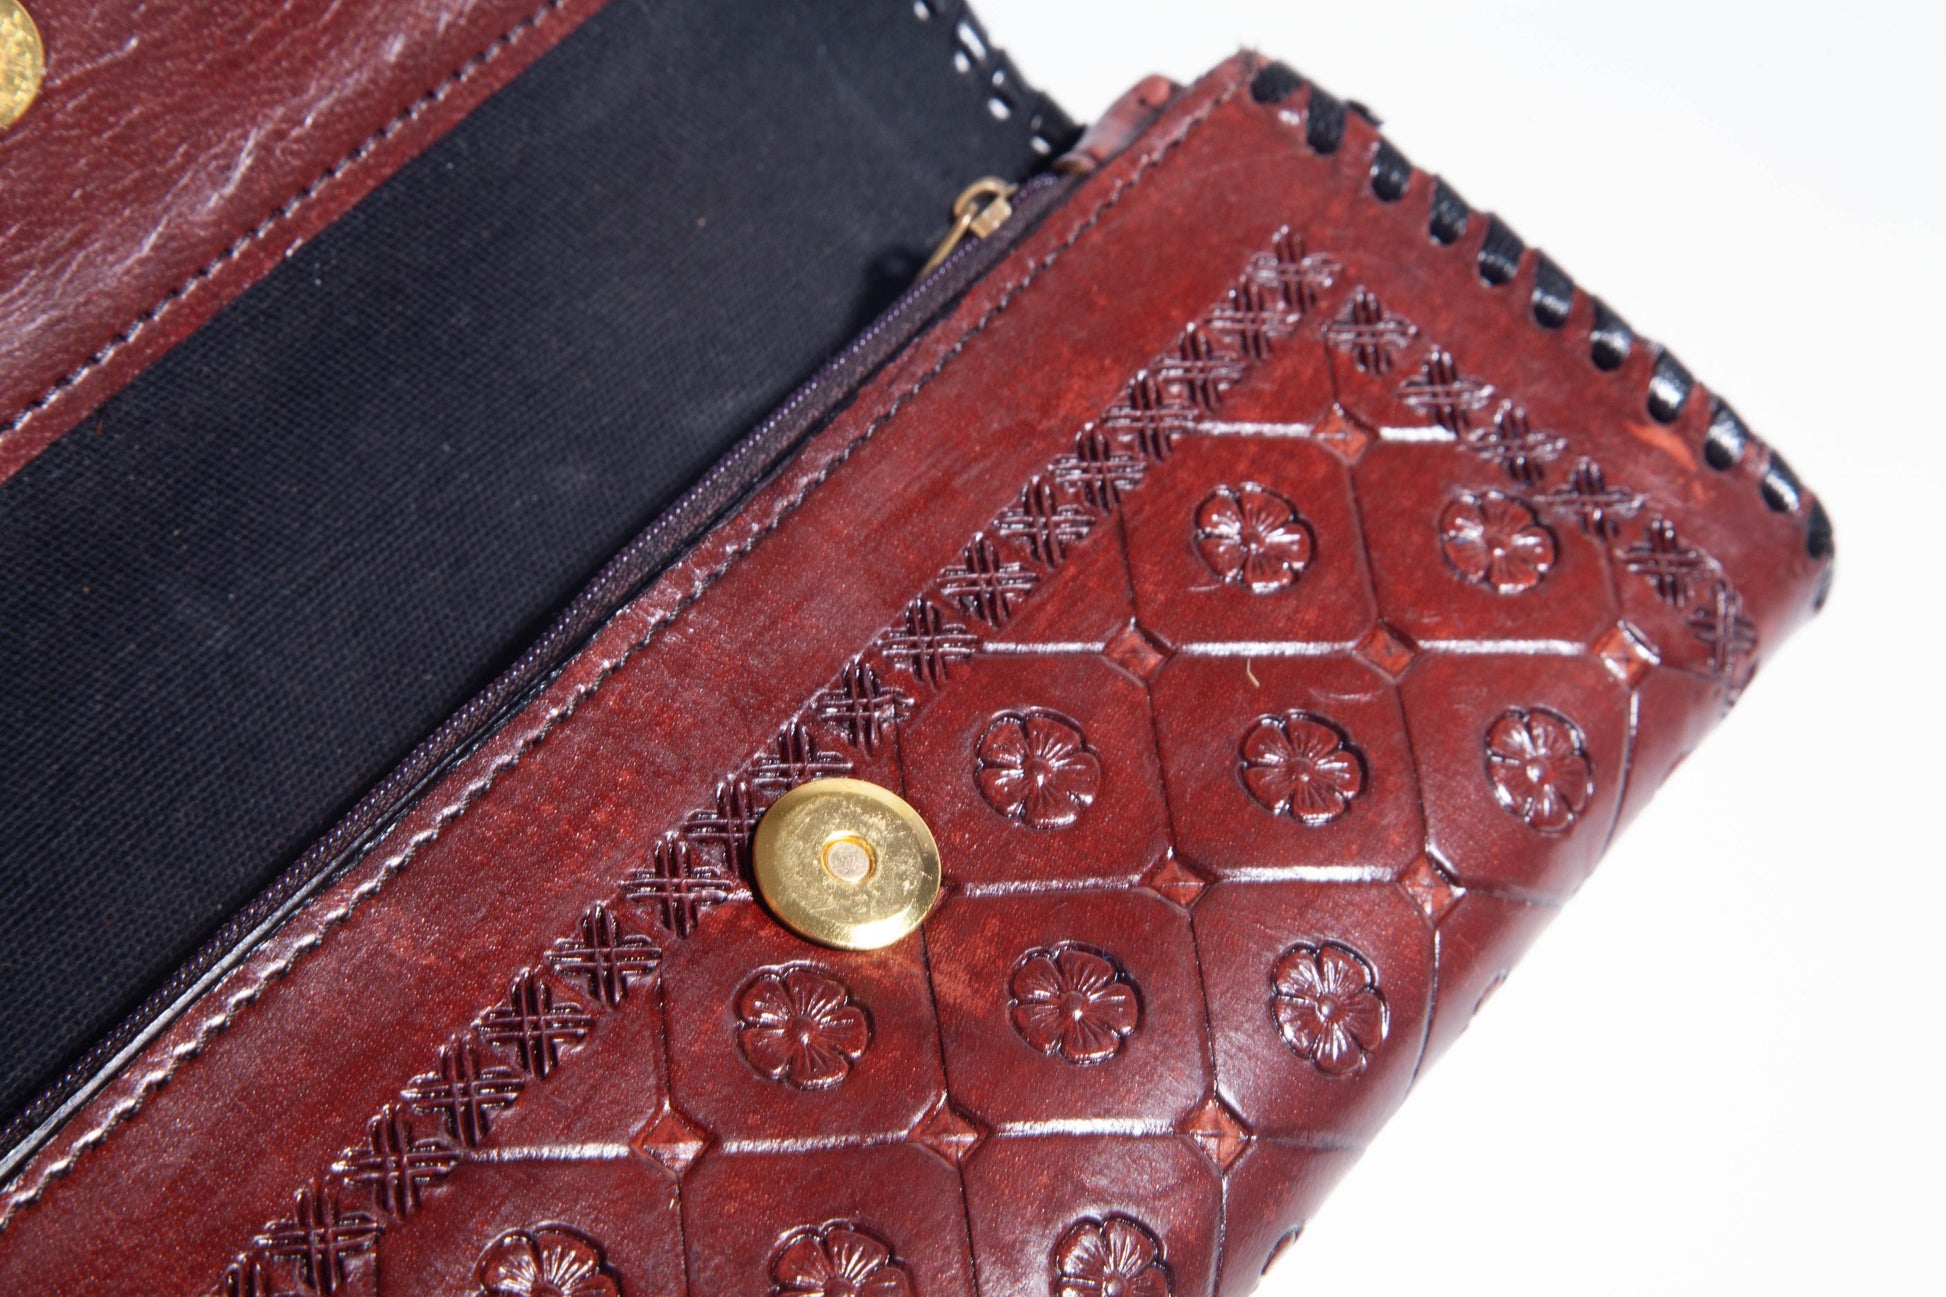 Handmade Women's Floral Leather Wallet Clasp